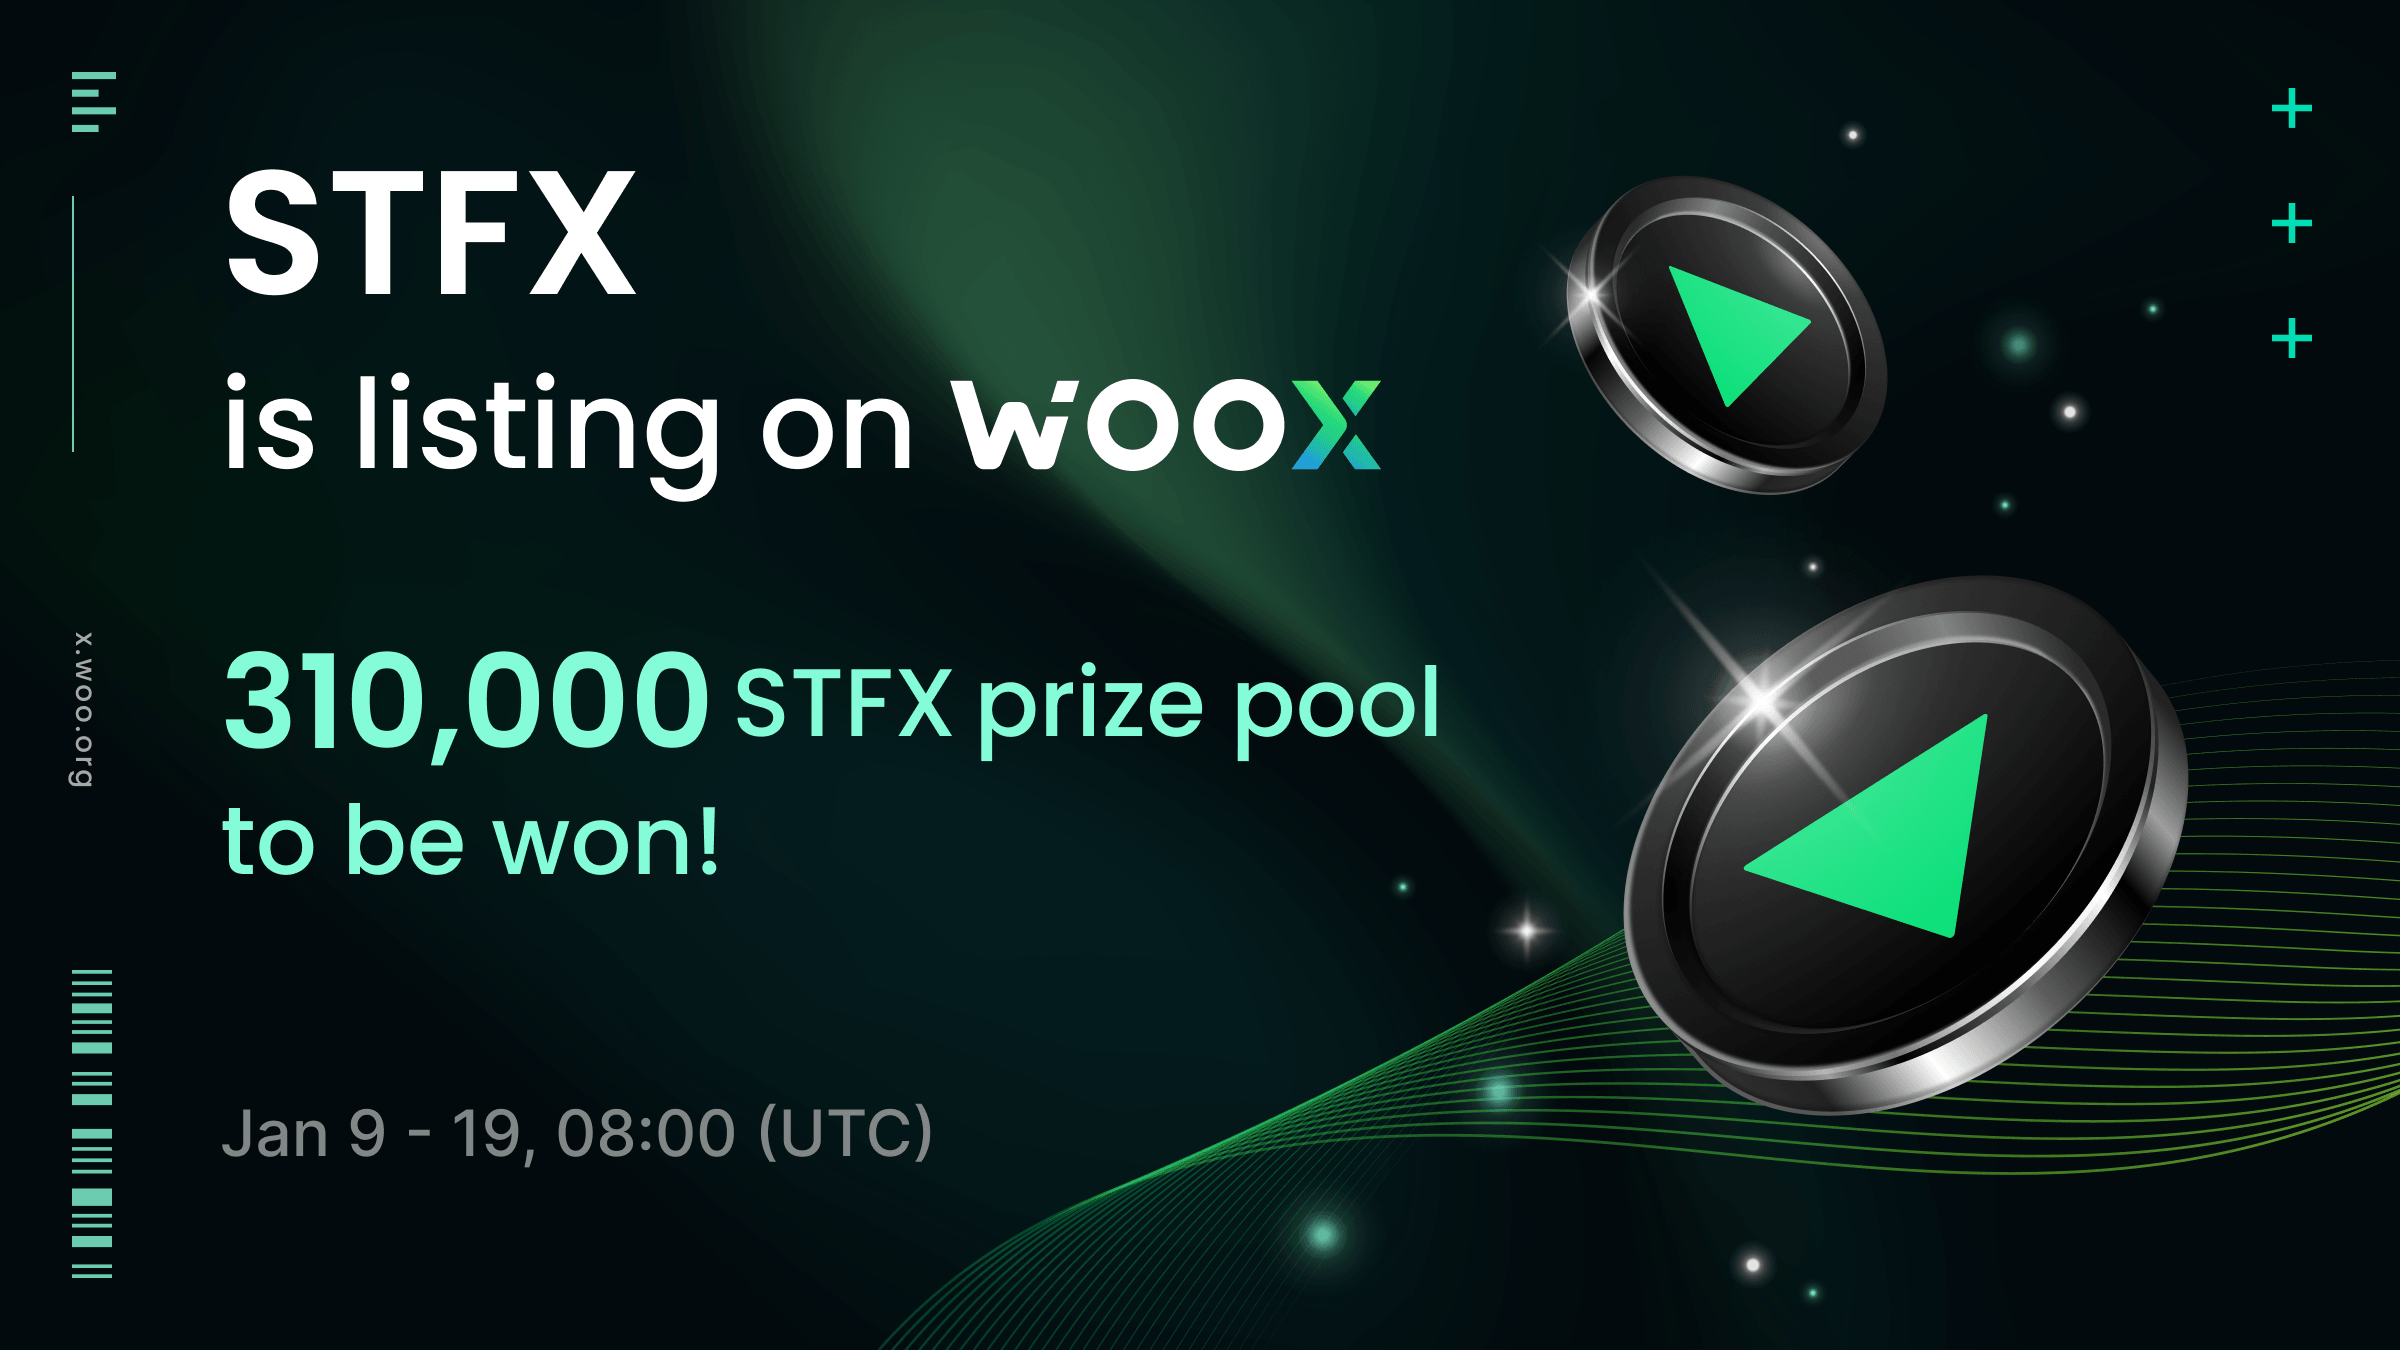 STFX (STFX) Listing on WOO X - Share a 310,000 STFX prize pool!